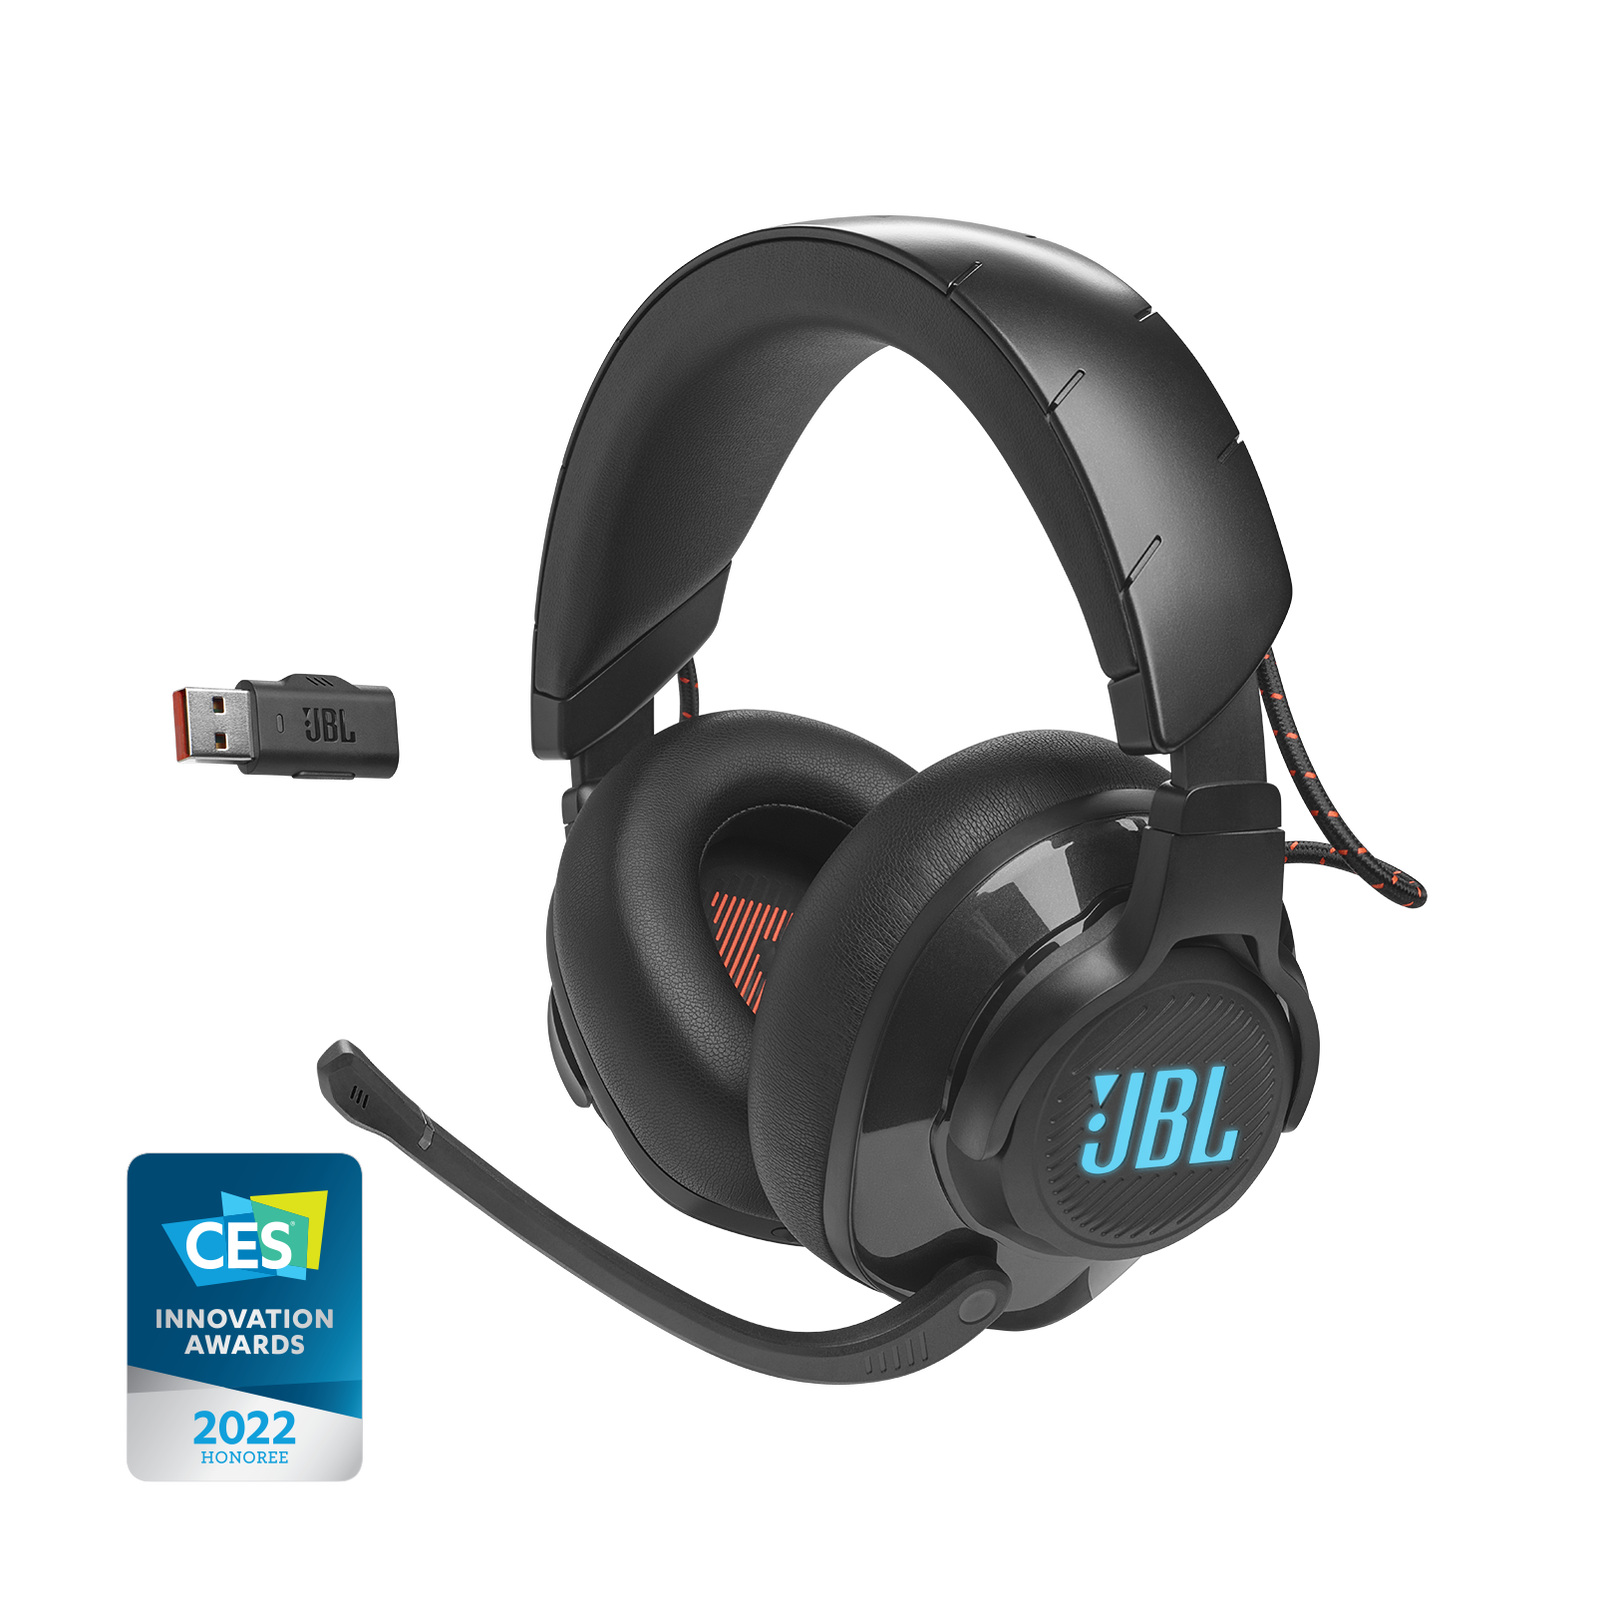 JBL Quantum 610 Black | Over-Ear 2.4G Wireless Gaming Headset - JBL 9.1 Surround Sound & Mic Noise Cancelling - PS5/XBOX One/Switch/PC Compatible Gaming Headset REFURBISHED